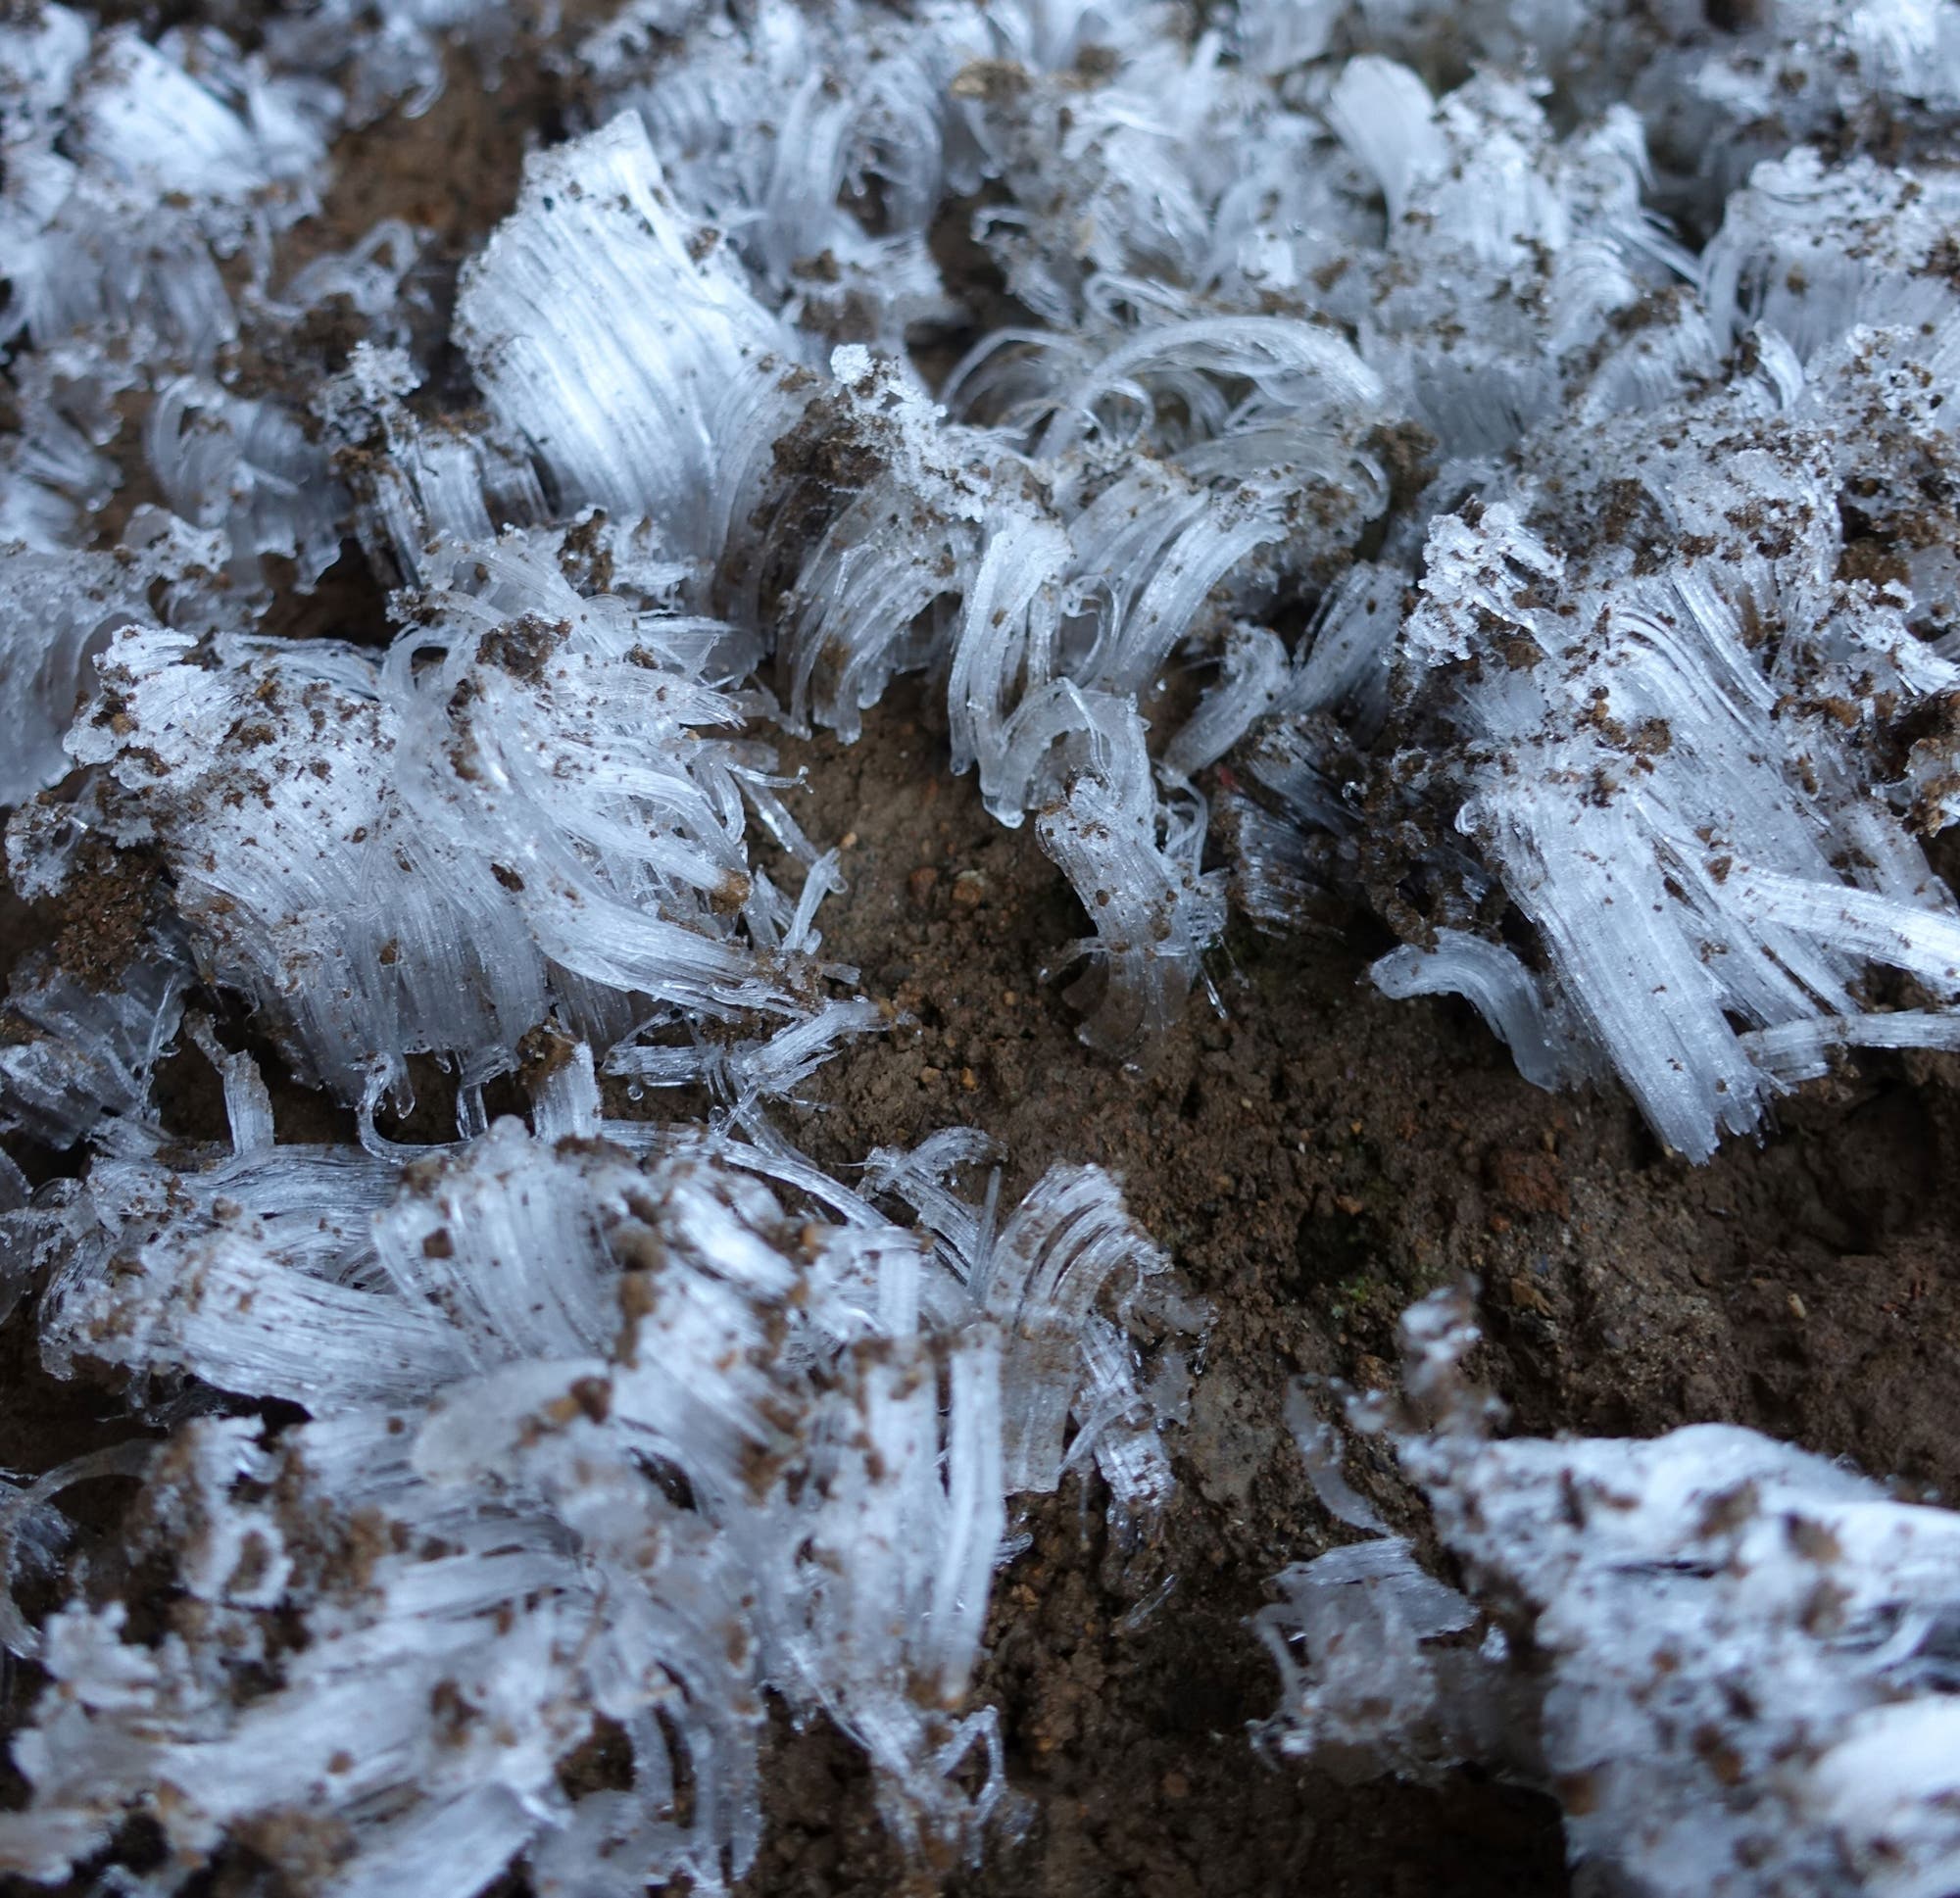 Ice needles grow on clay soil in different directions